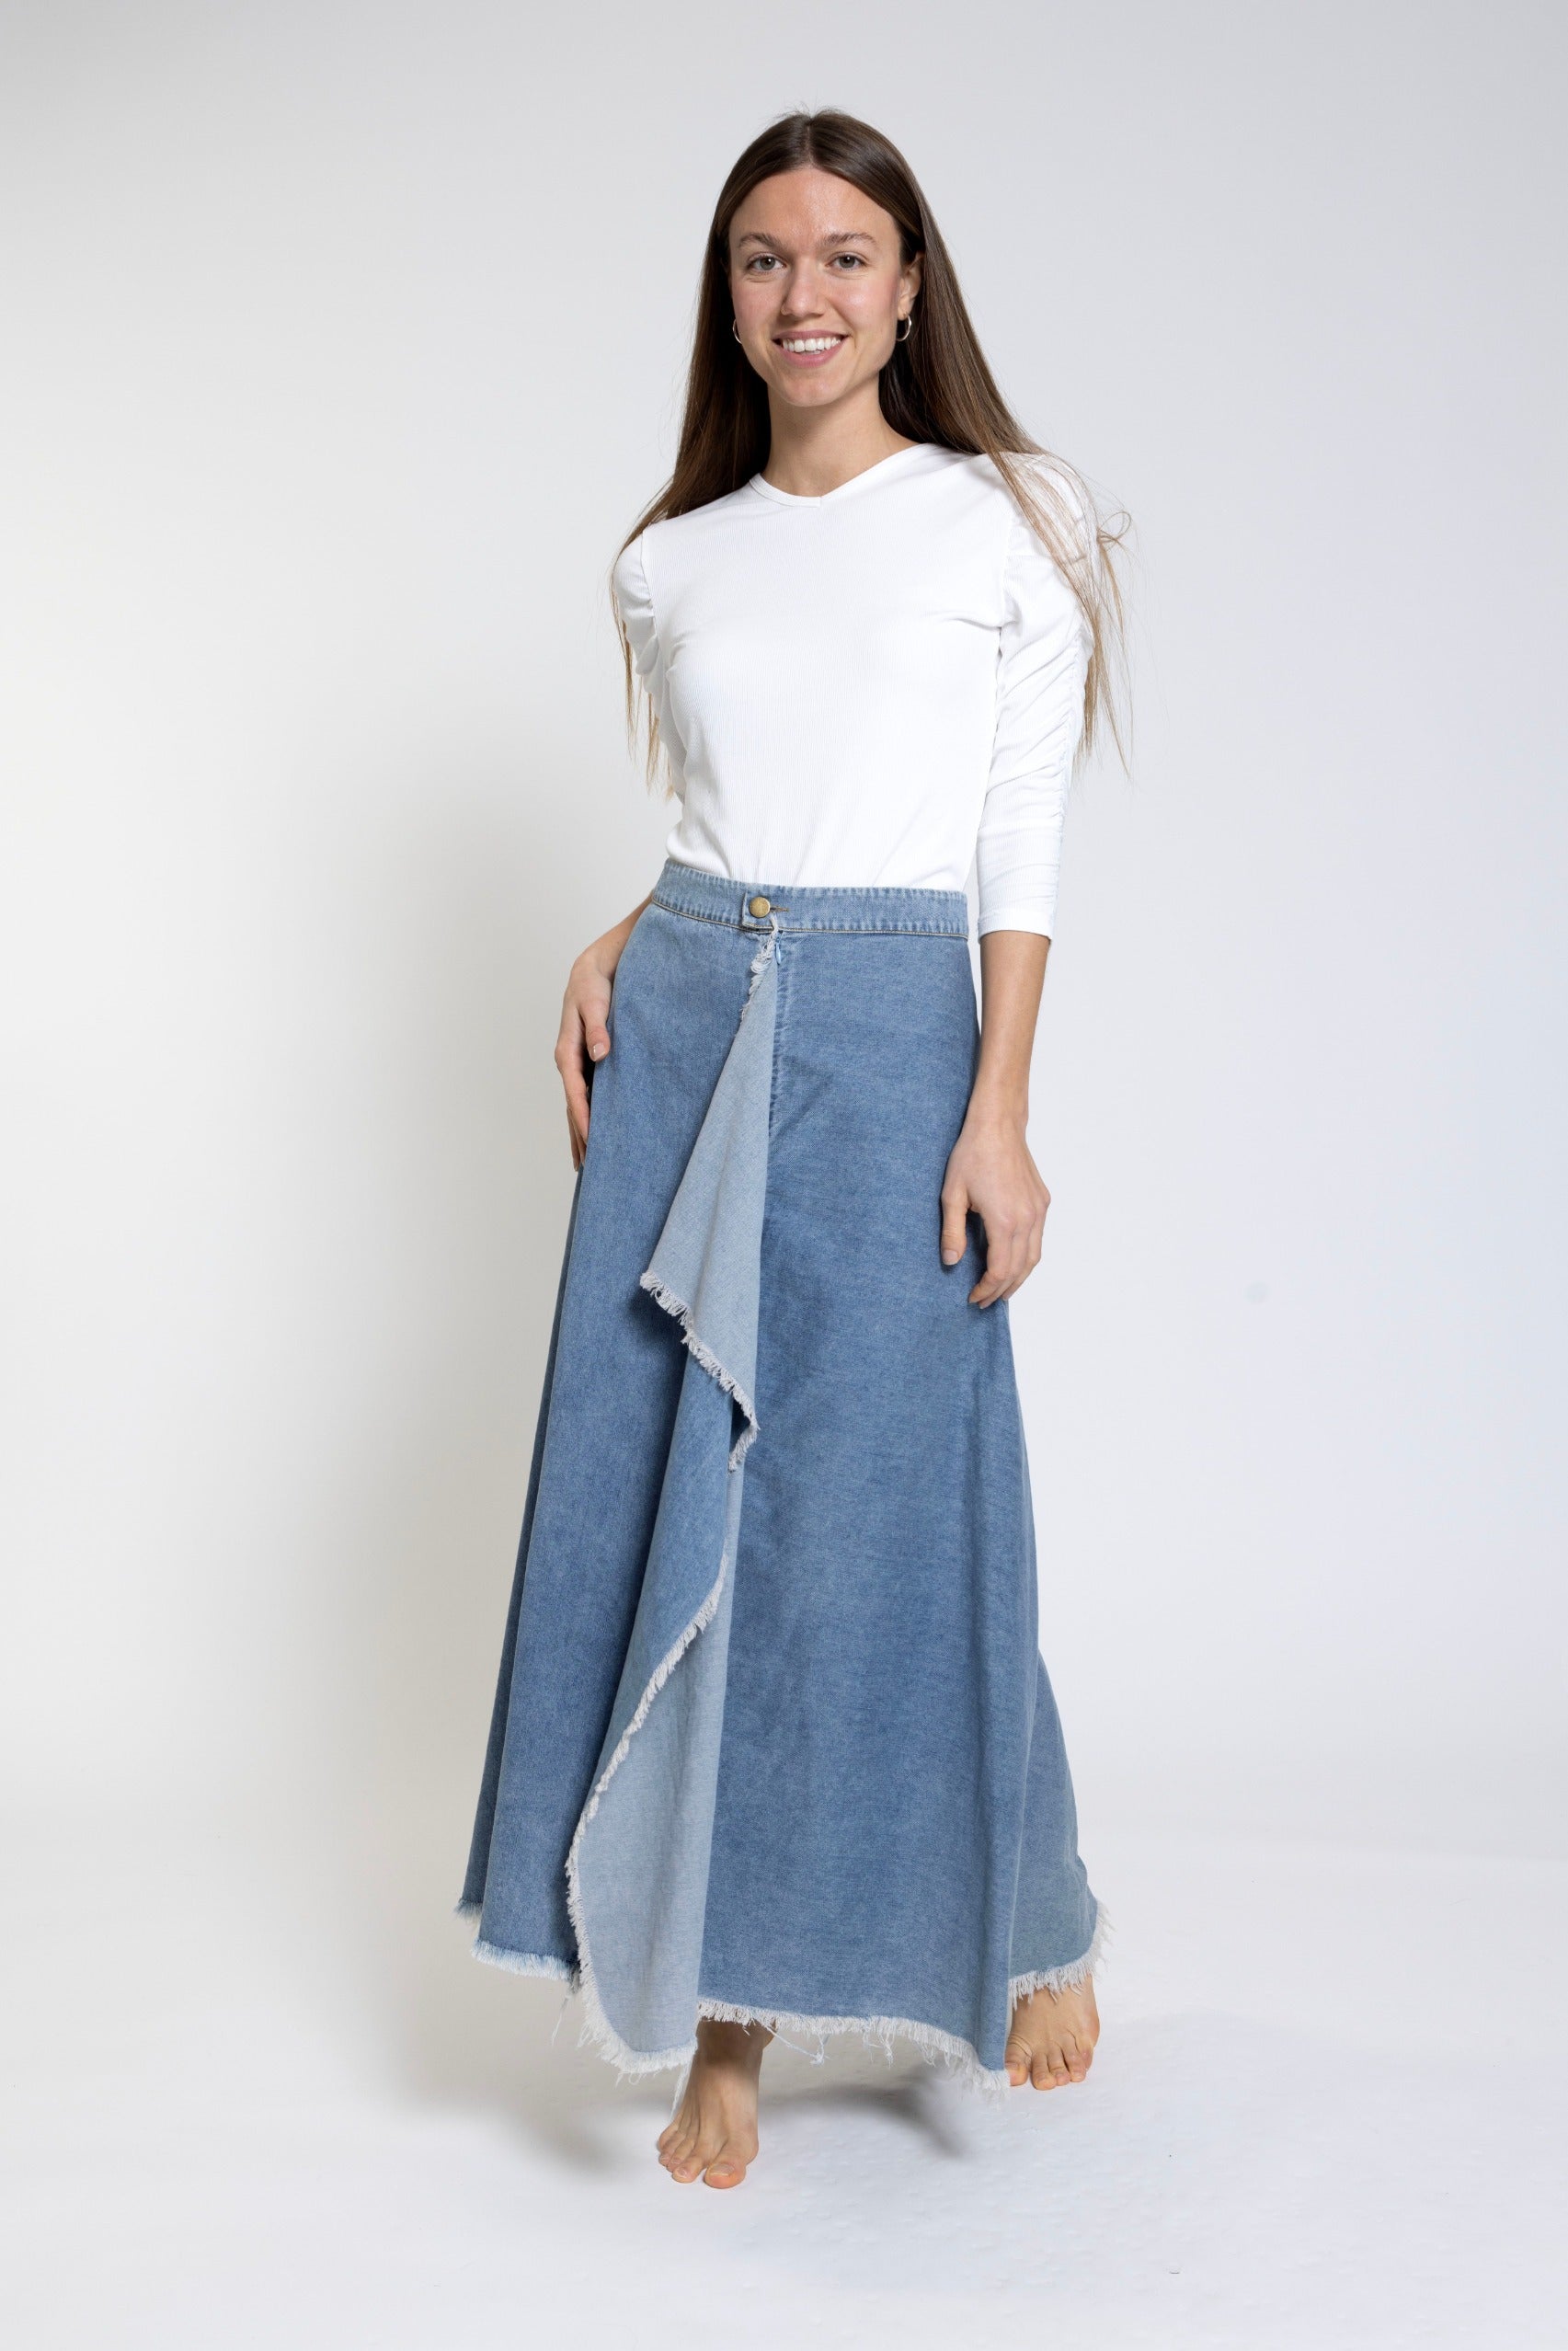 Blue Denim Skirt With Front Ruffle